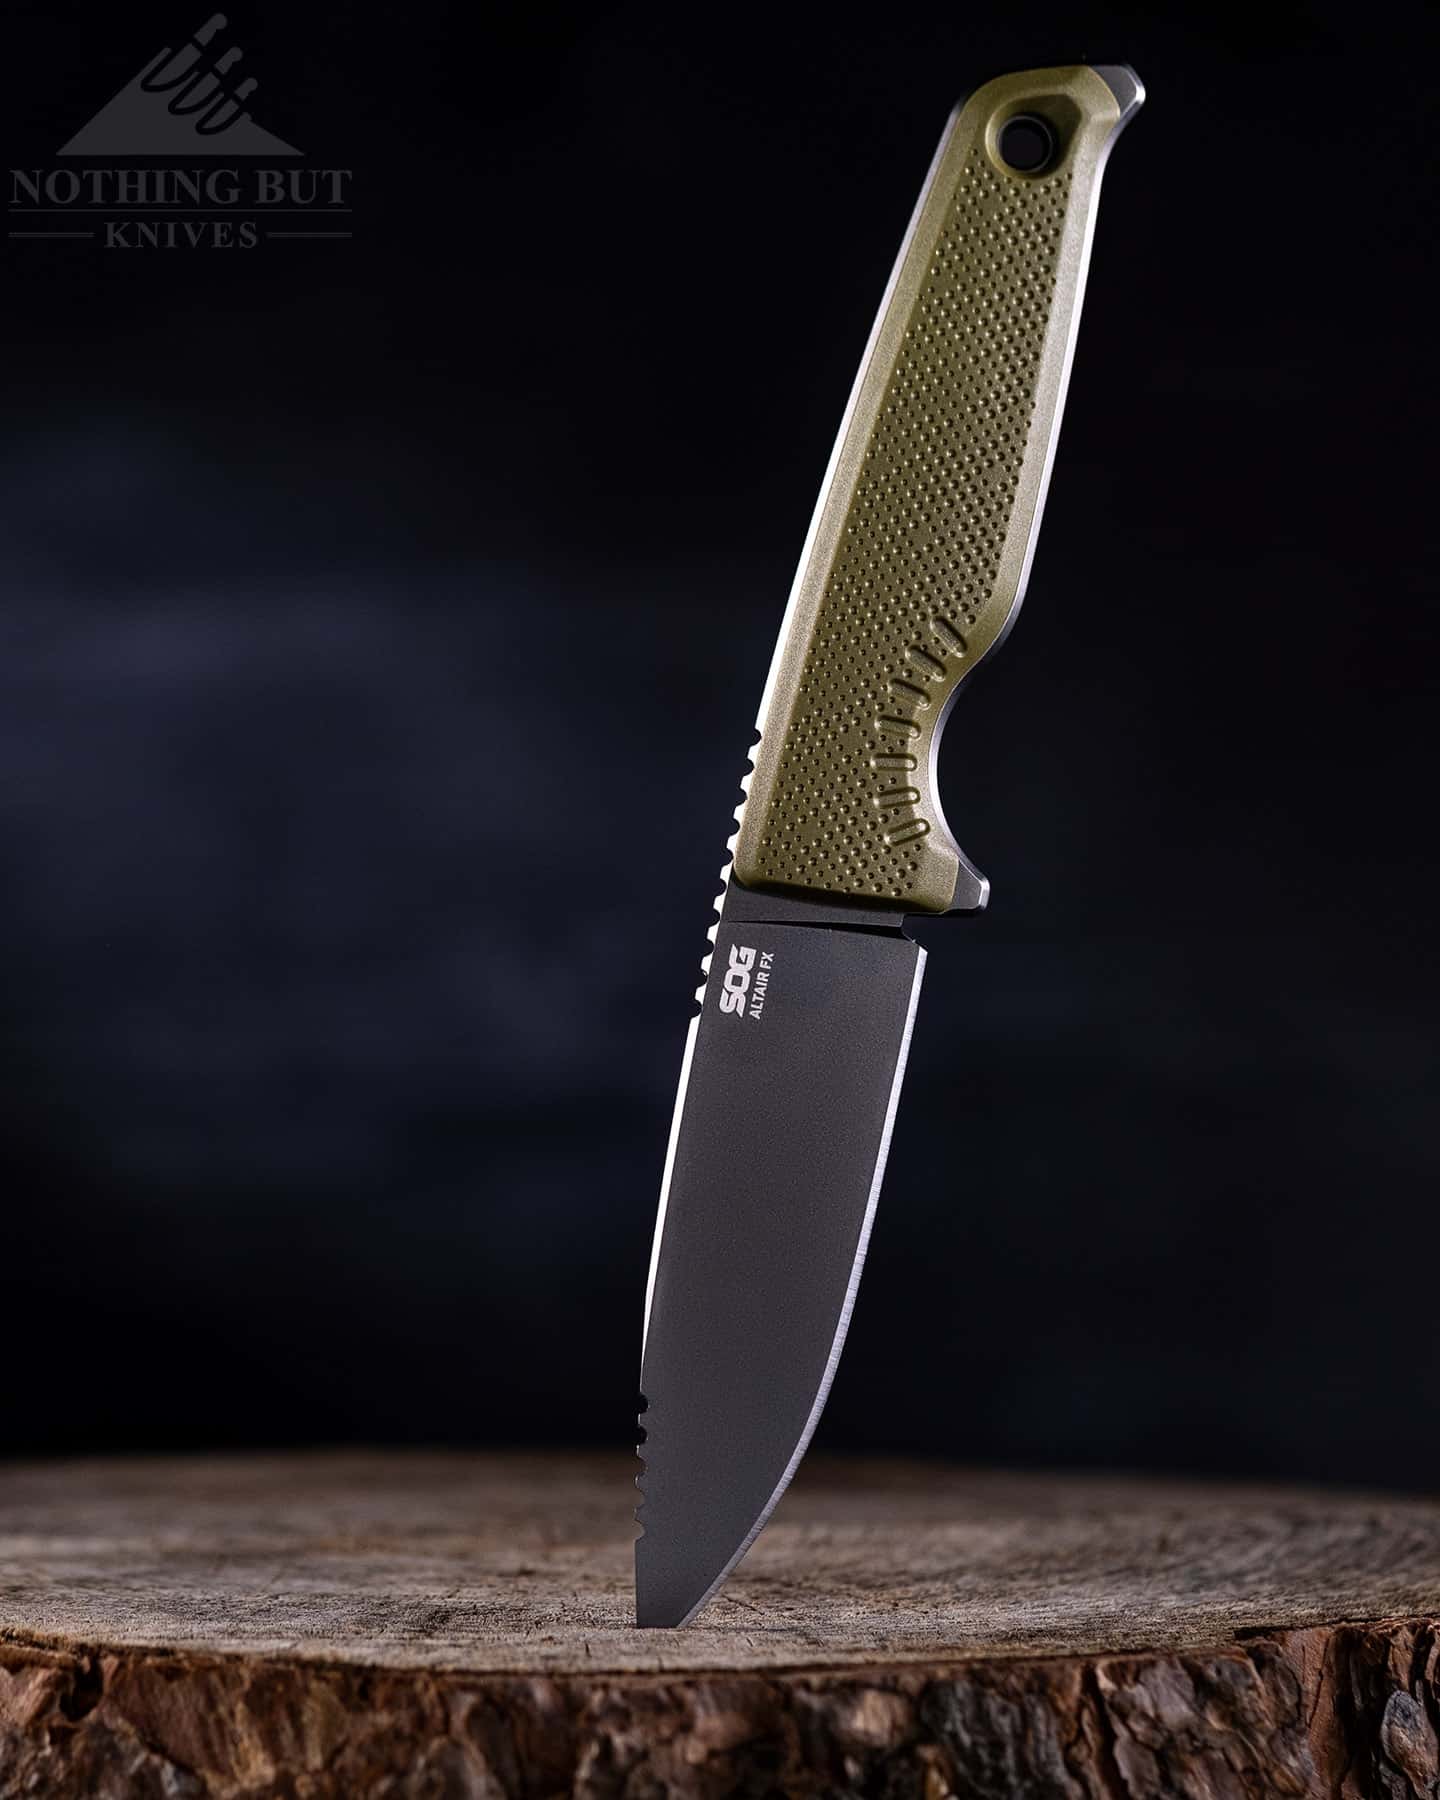 The SOG Altair is a great fixed blade adaptation of a folder.